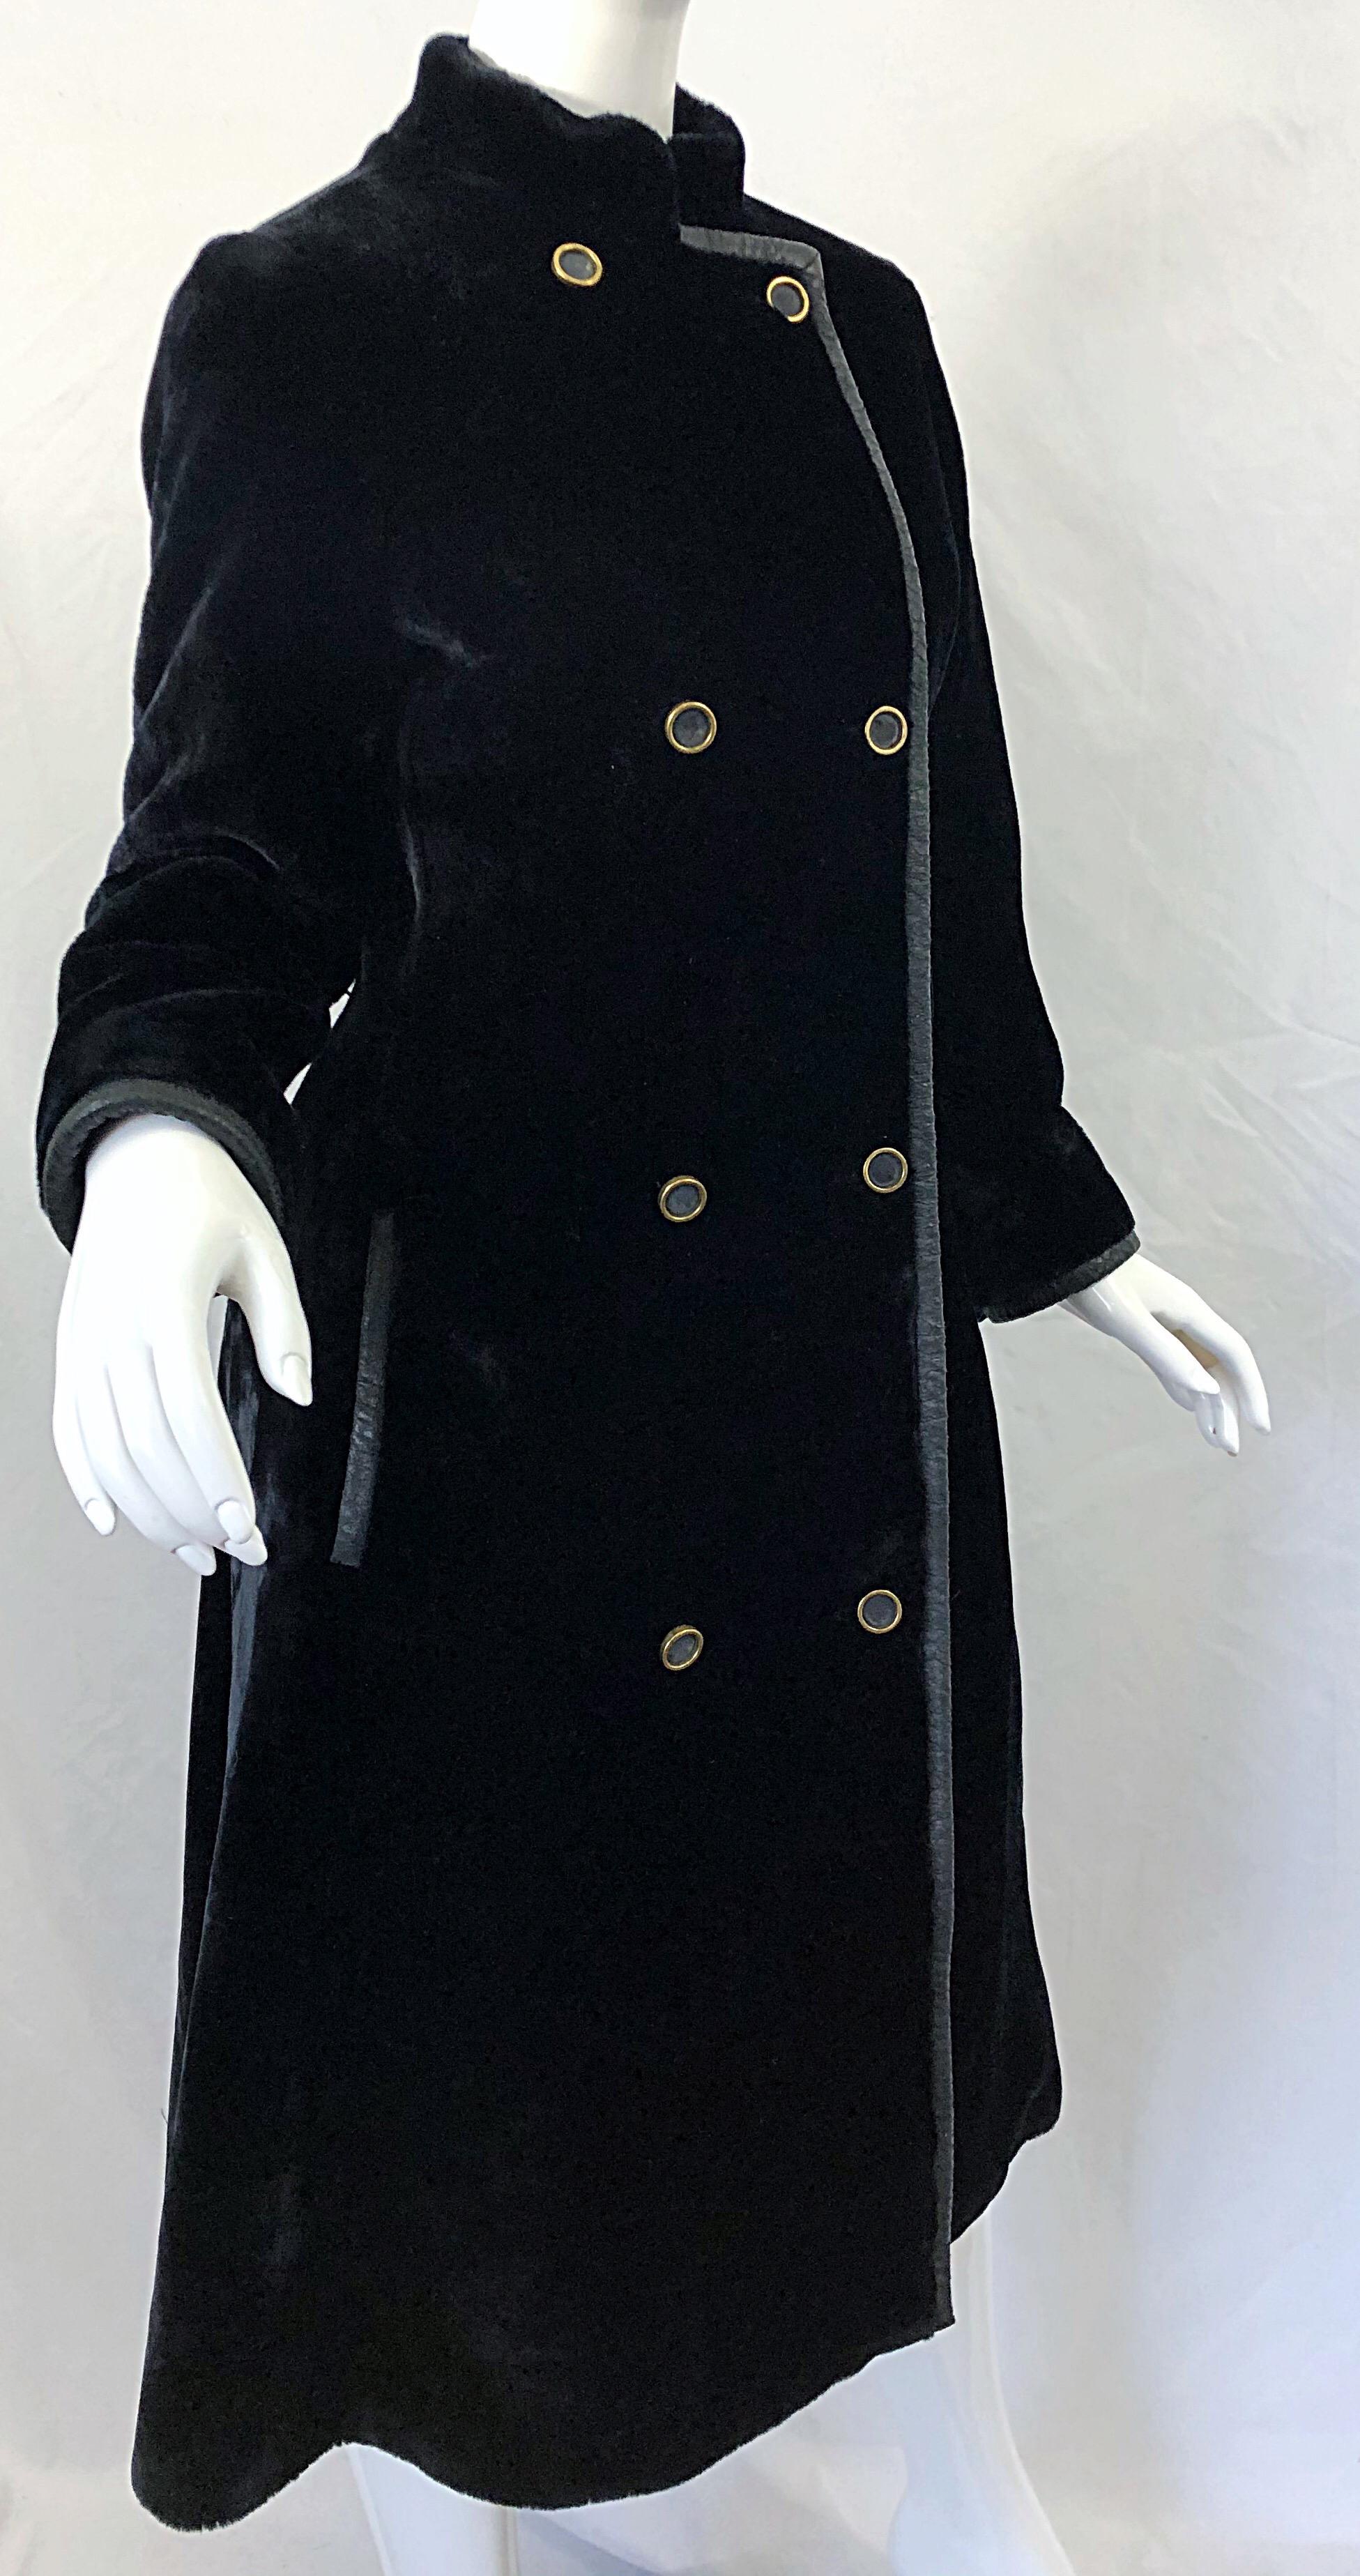 Givenchy 1960s Faux Fur Black Double Breasted Vintage 60s Swing Jacket Coat 3